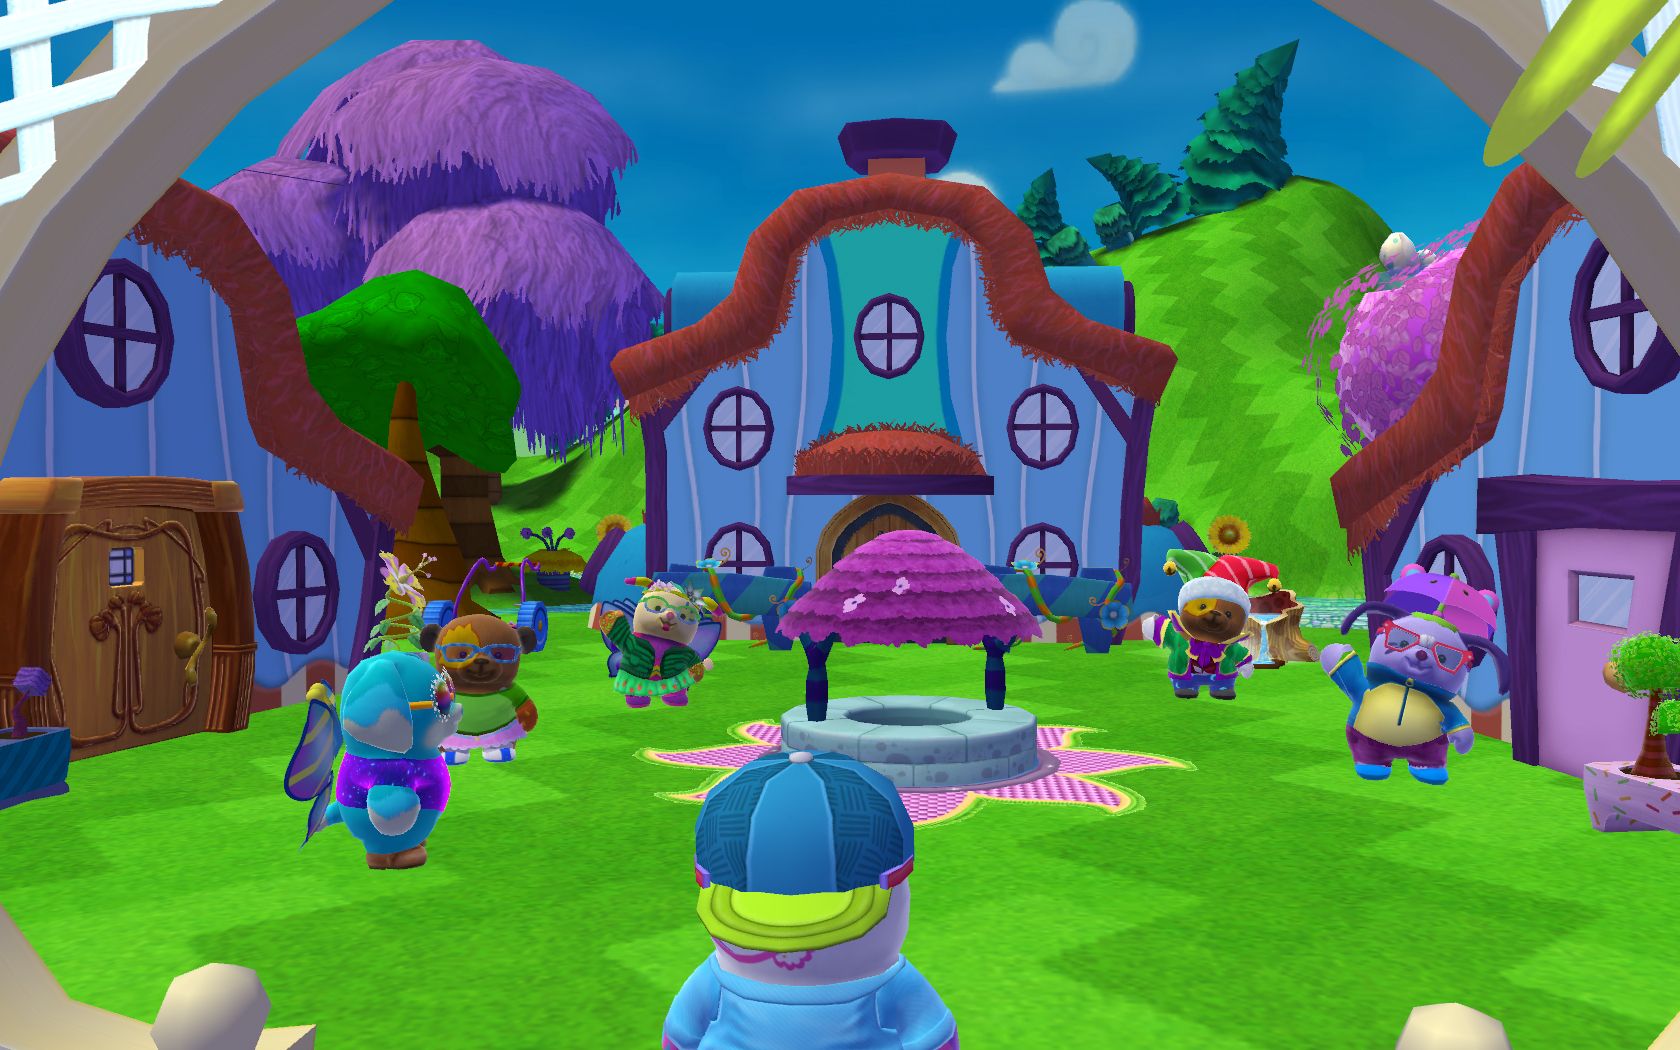 MMO Games for Kids and Teens - Harmless Fun? 1